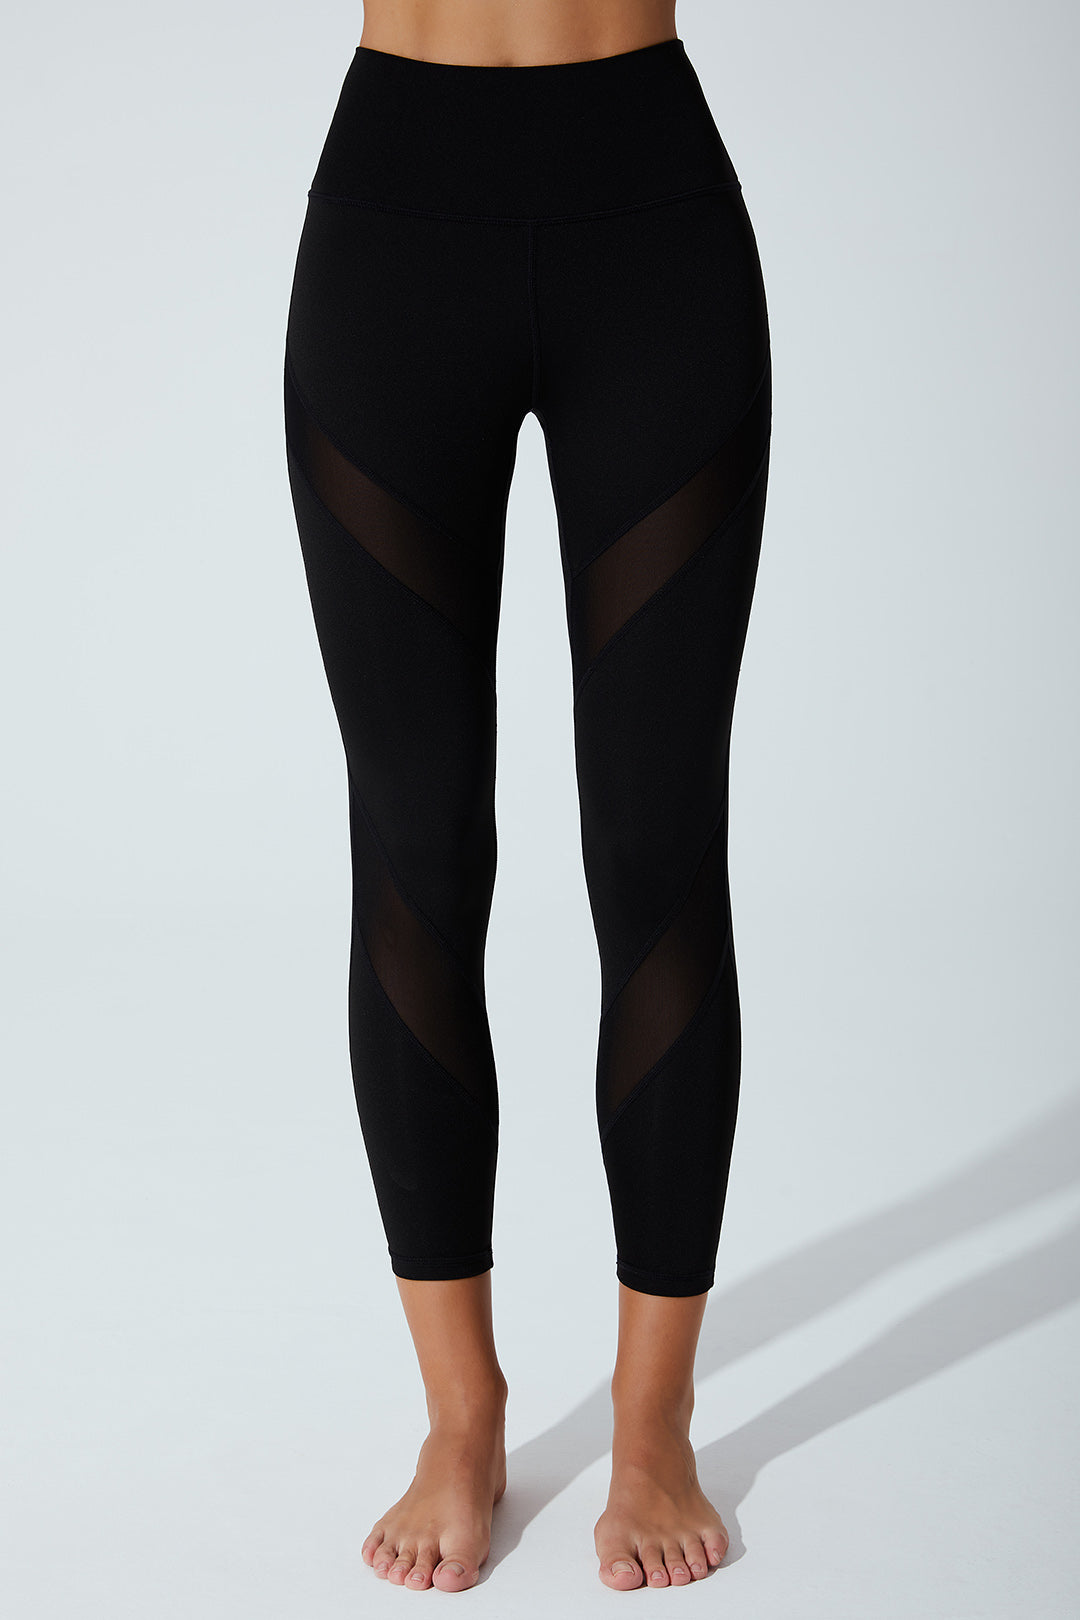 Black women's leggings with Luziana Bmesh design, perfect for a stylish and comfortable look.